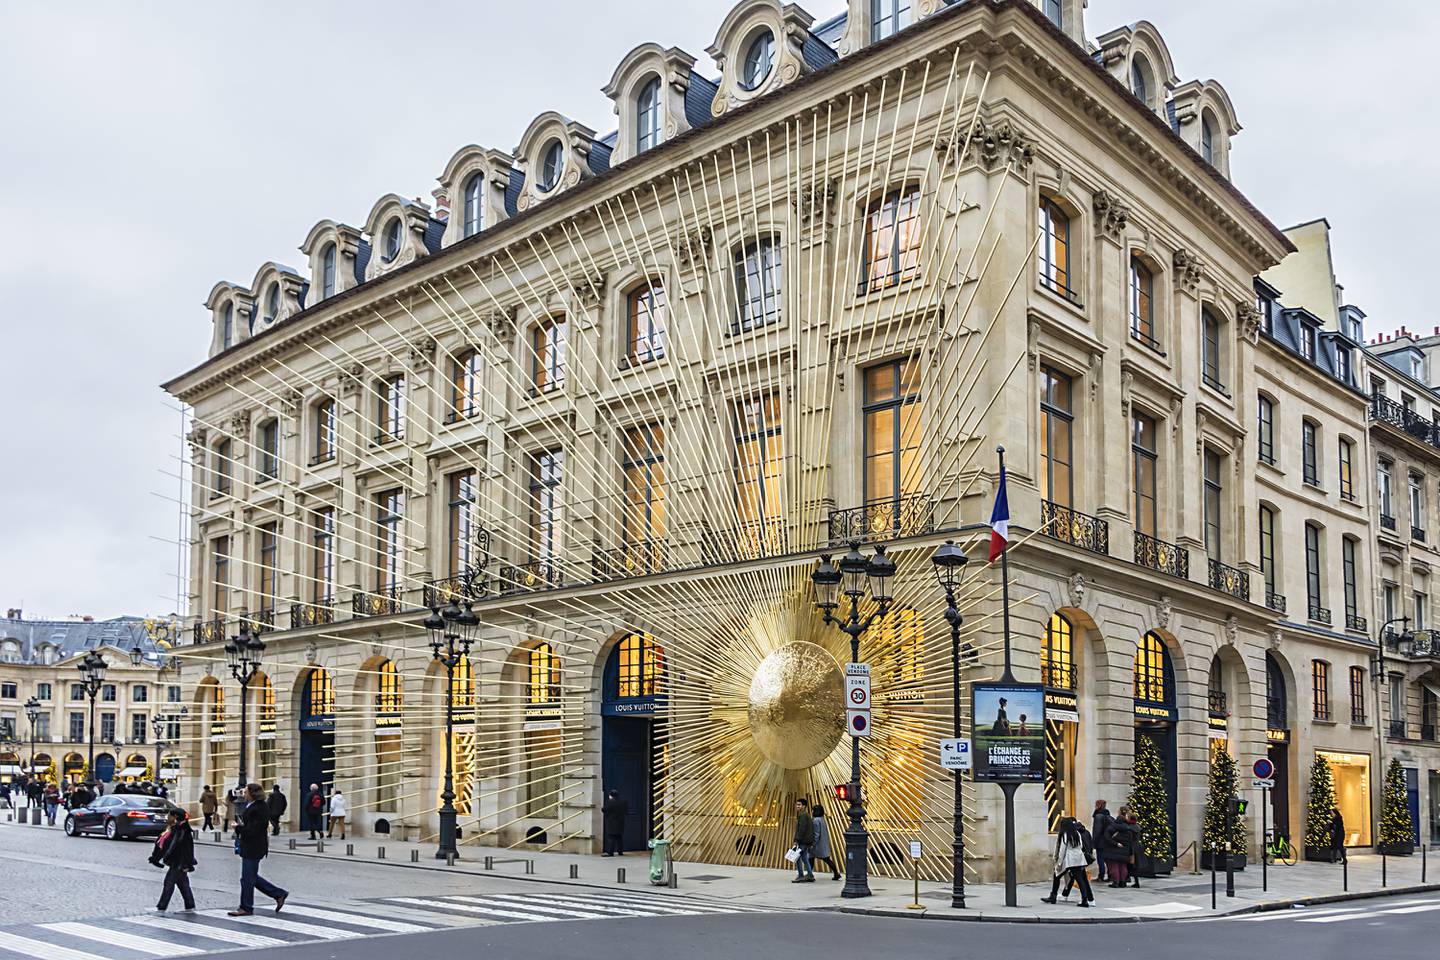 Surging sales at Louis Vuitton, Dior and Fendi powered LVMH’s performance in the second quarter.